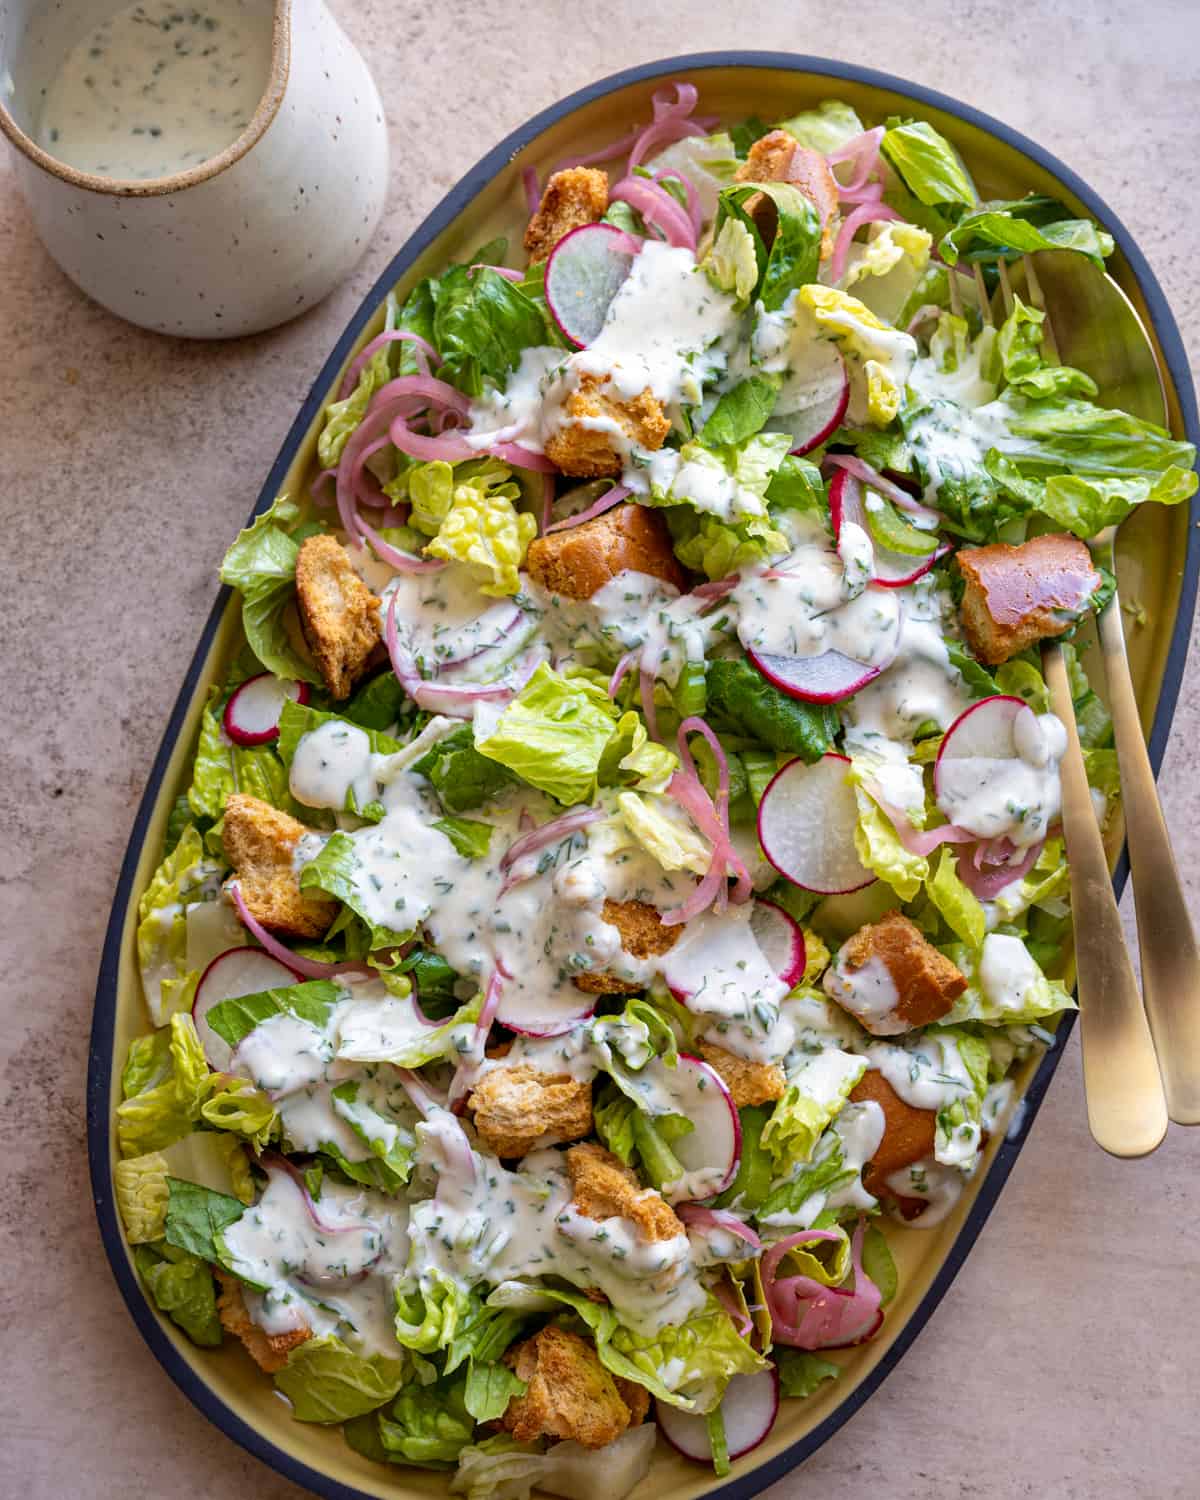 vegan ranch dressing drizzled over romaine salad with pickled radishes and croutons on yellow platter.